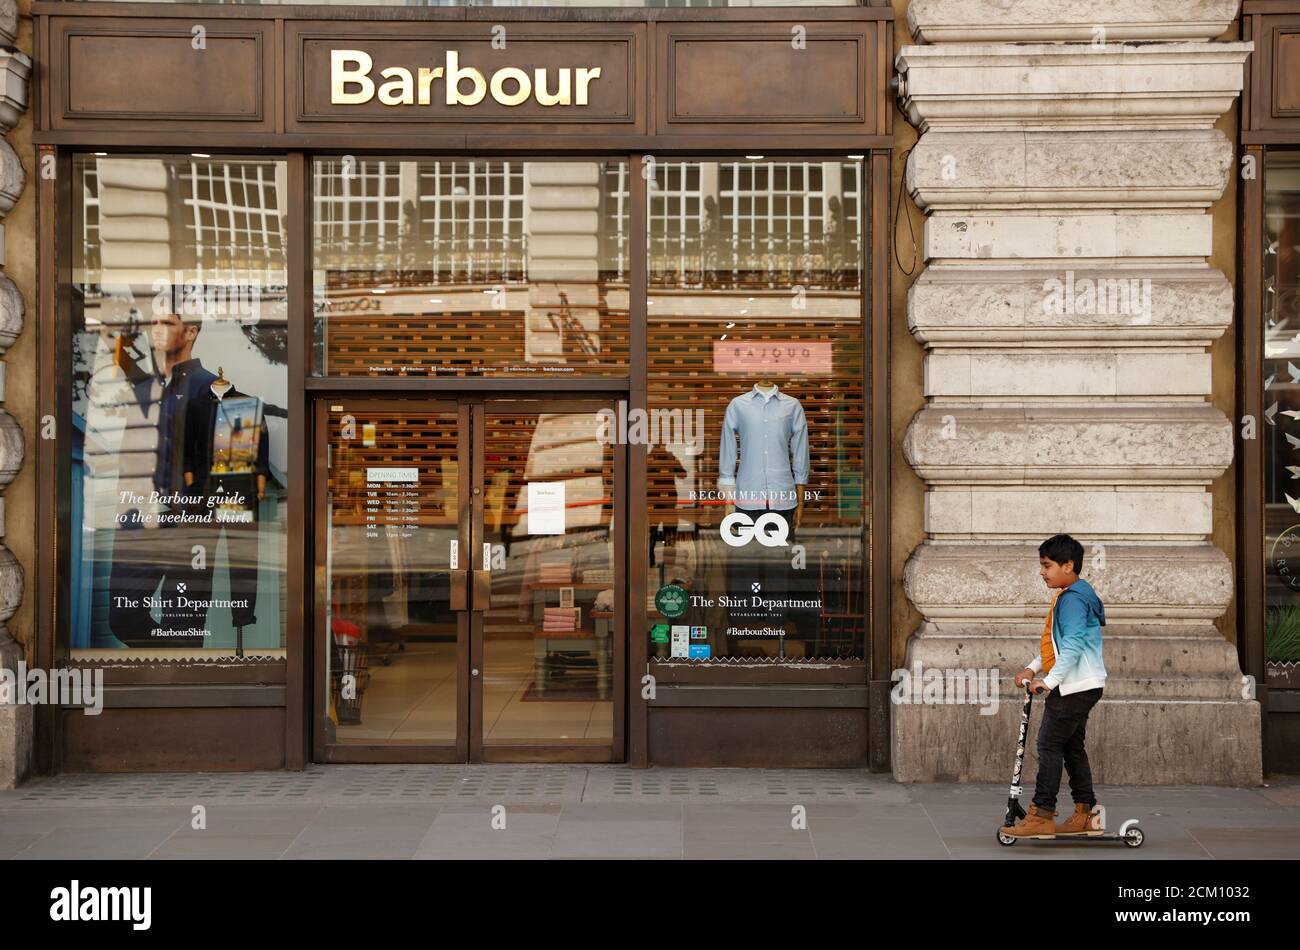 Barbour Store High Resolution Stock Photography and Images - Alamy